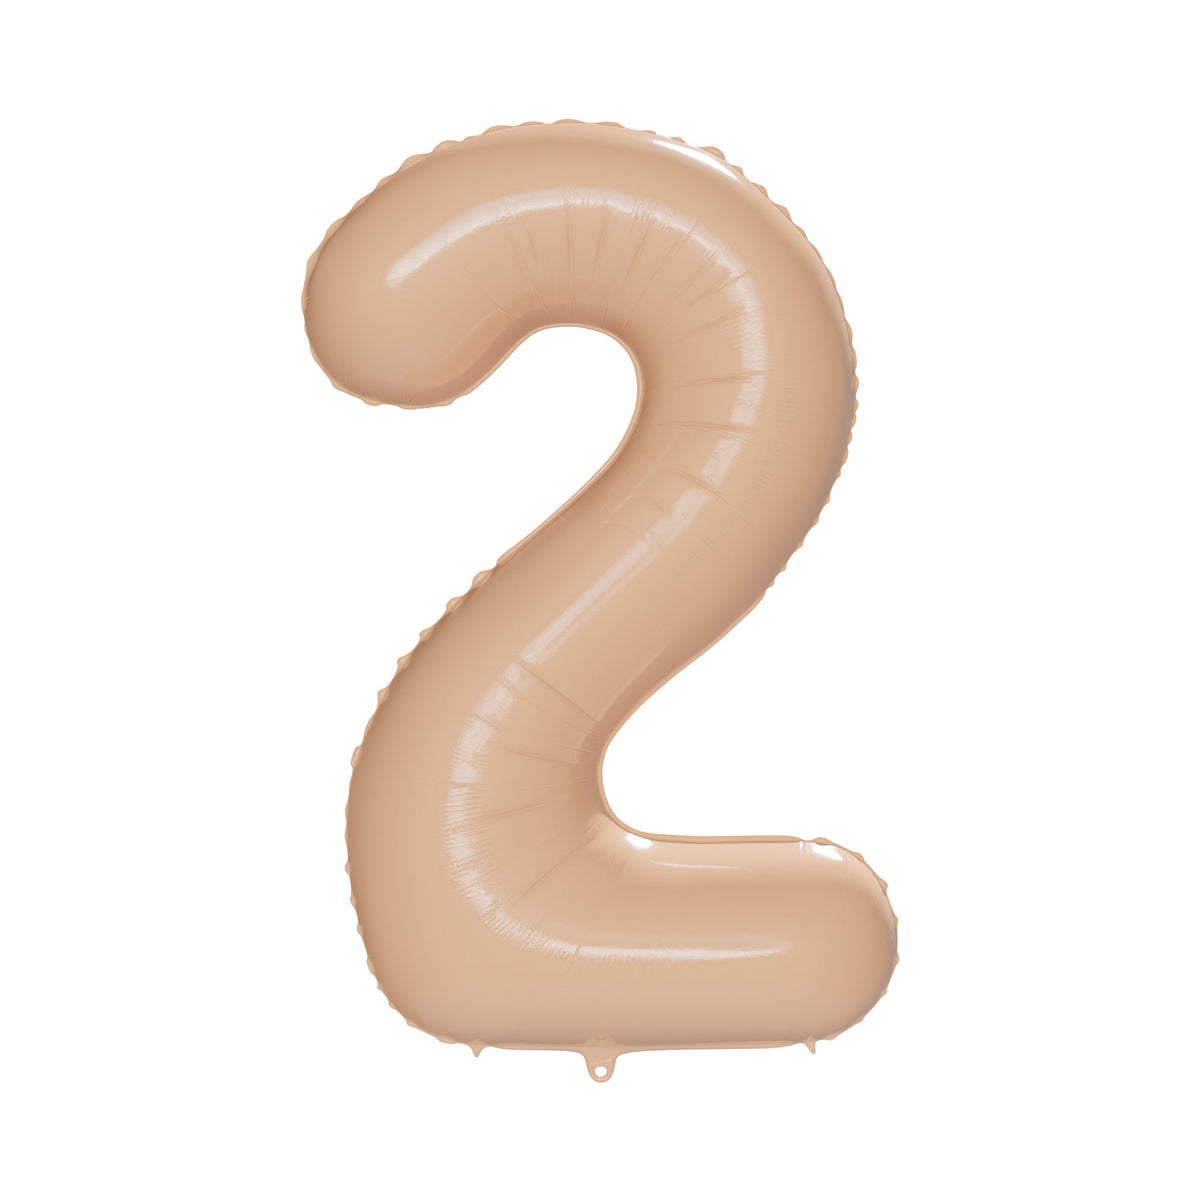 PARTYGRAM Balloons Blush Nude Number 2 Foil Balloon, Creamy Beige Matte Finish, Cappuccino, 34 Inches 810077658369